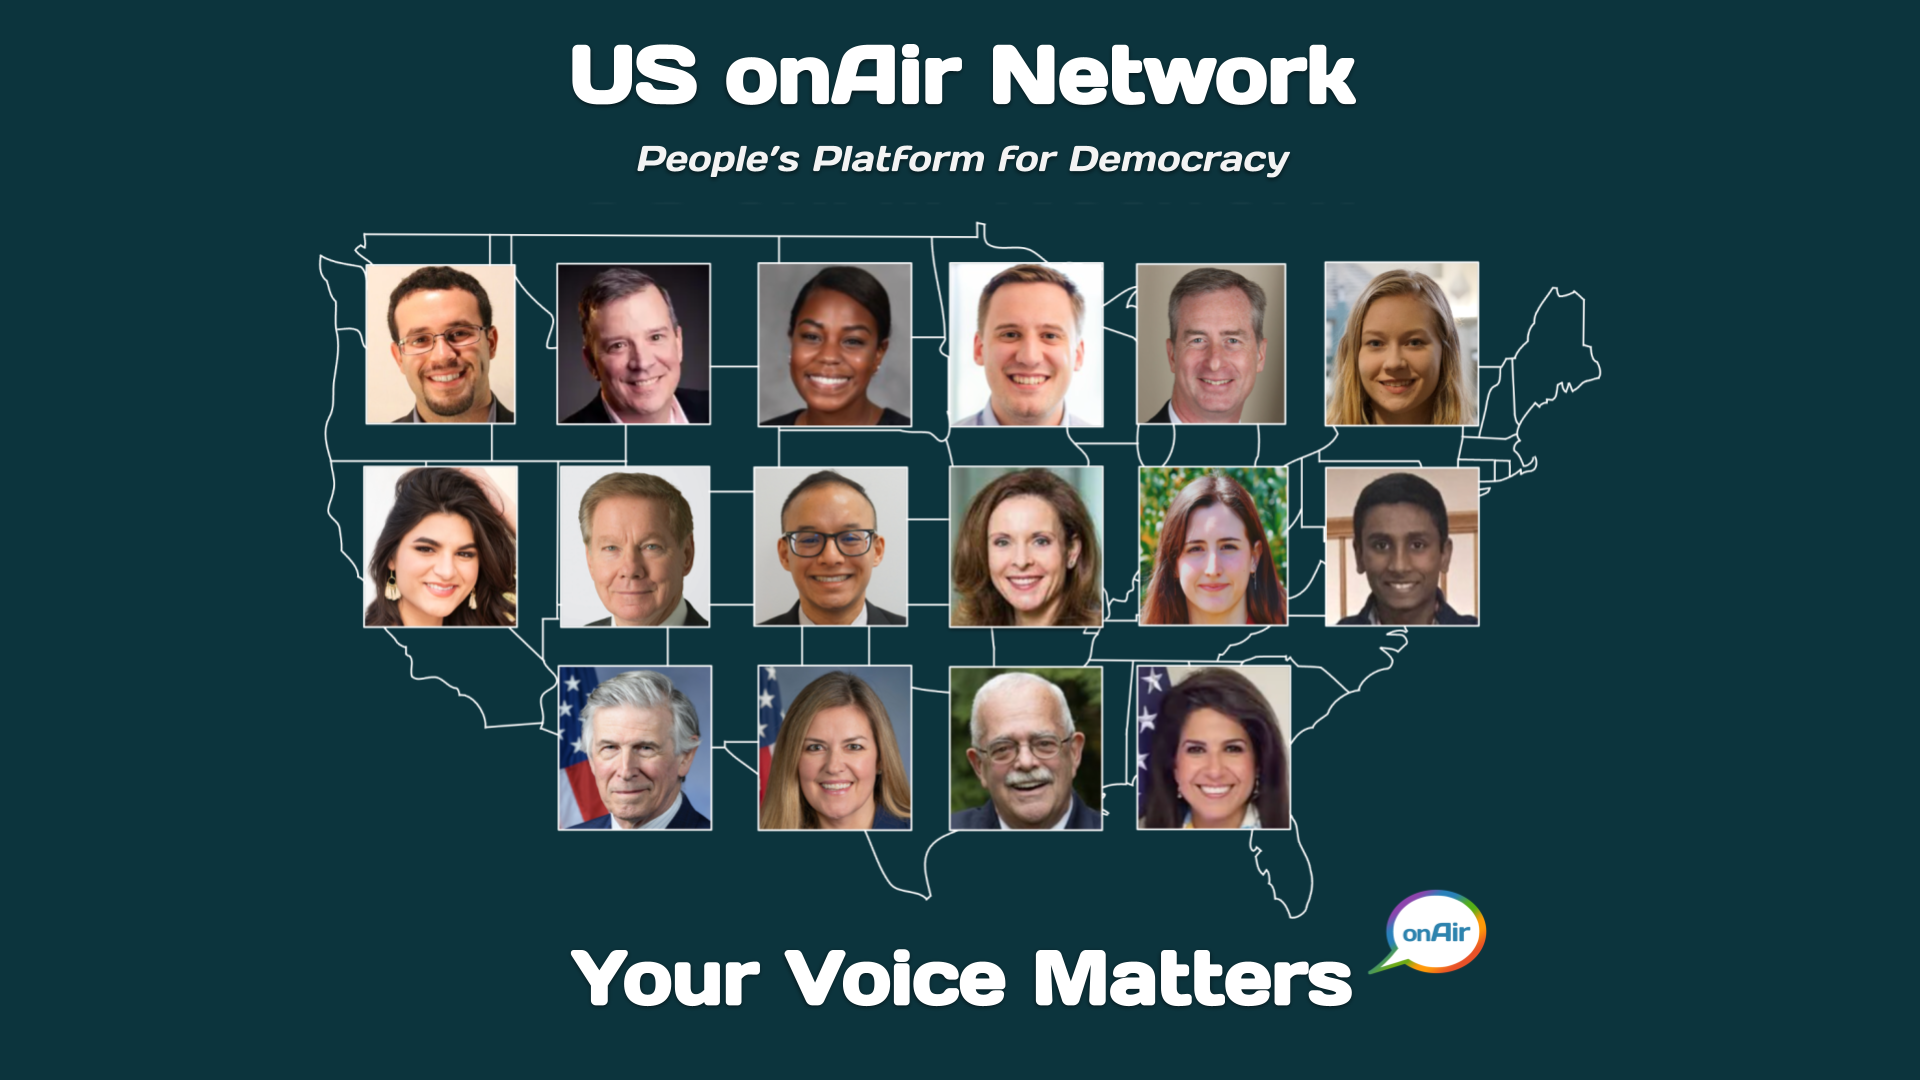 About the US onAir Network